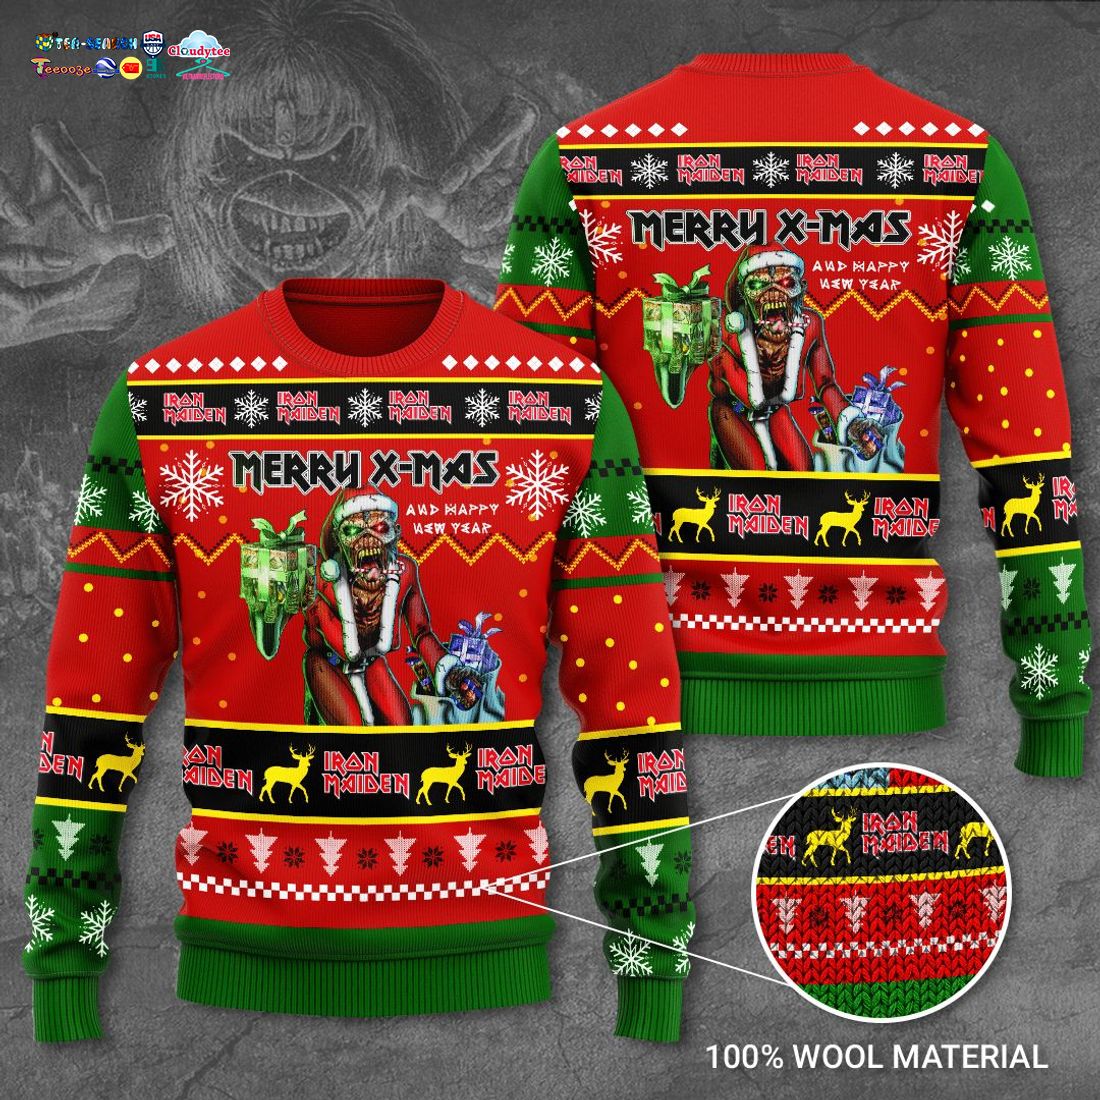 iron-maiden-merry-xmas-and-happy-new-year-ugly-christmas-sweater-1-T34LB.jpg